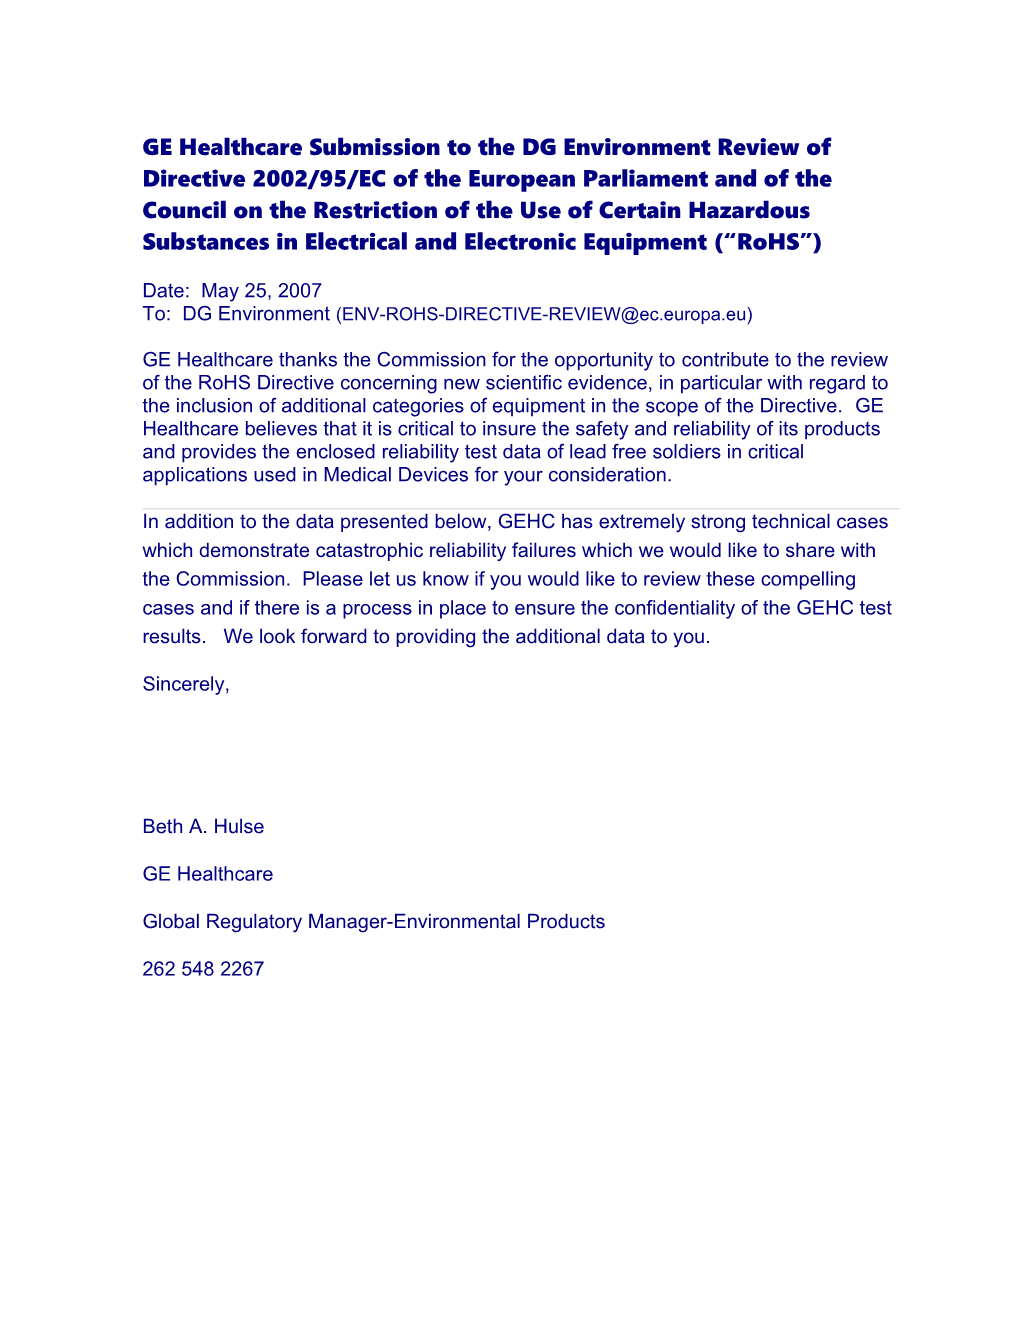 GE Healthcare Submission to the DG Environment Review of Directive 2002/95/Ecof the European